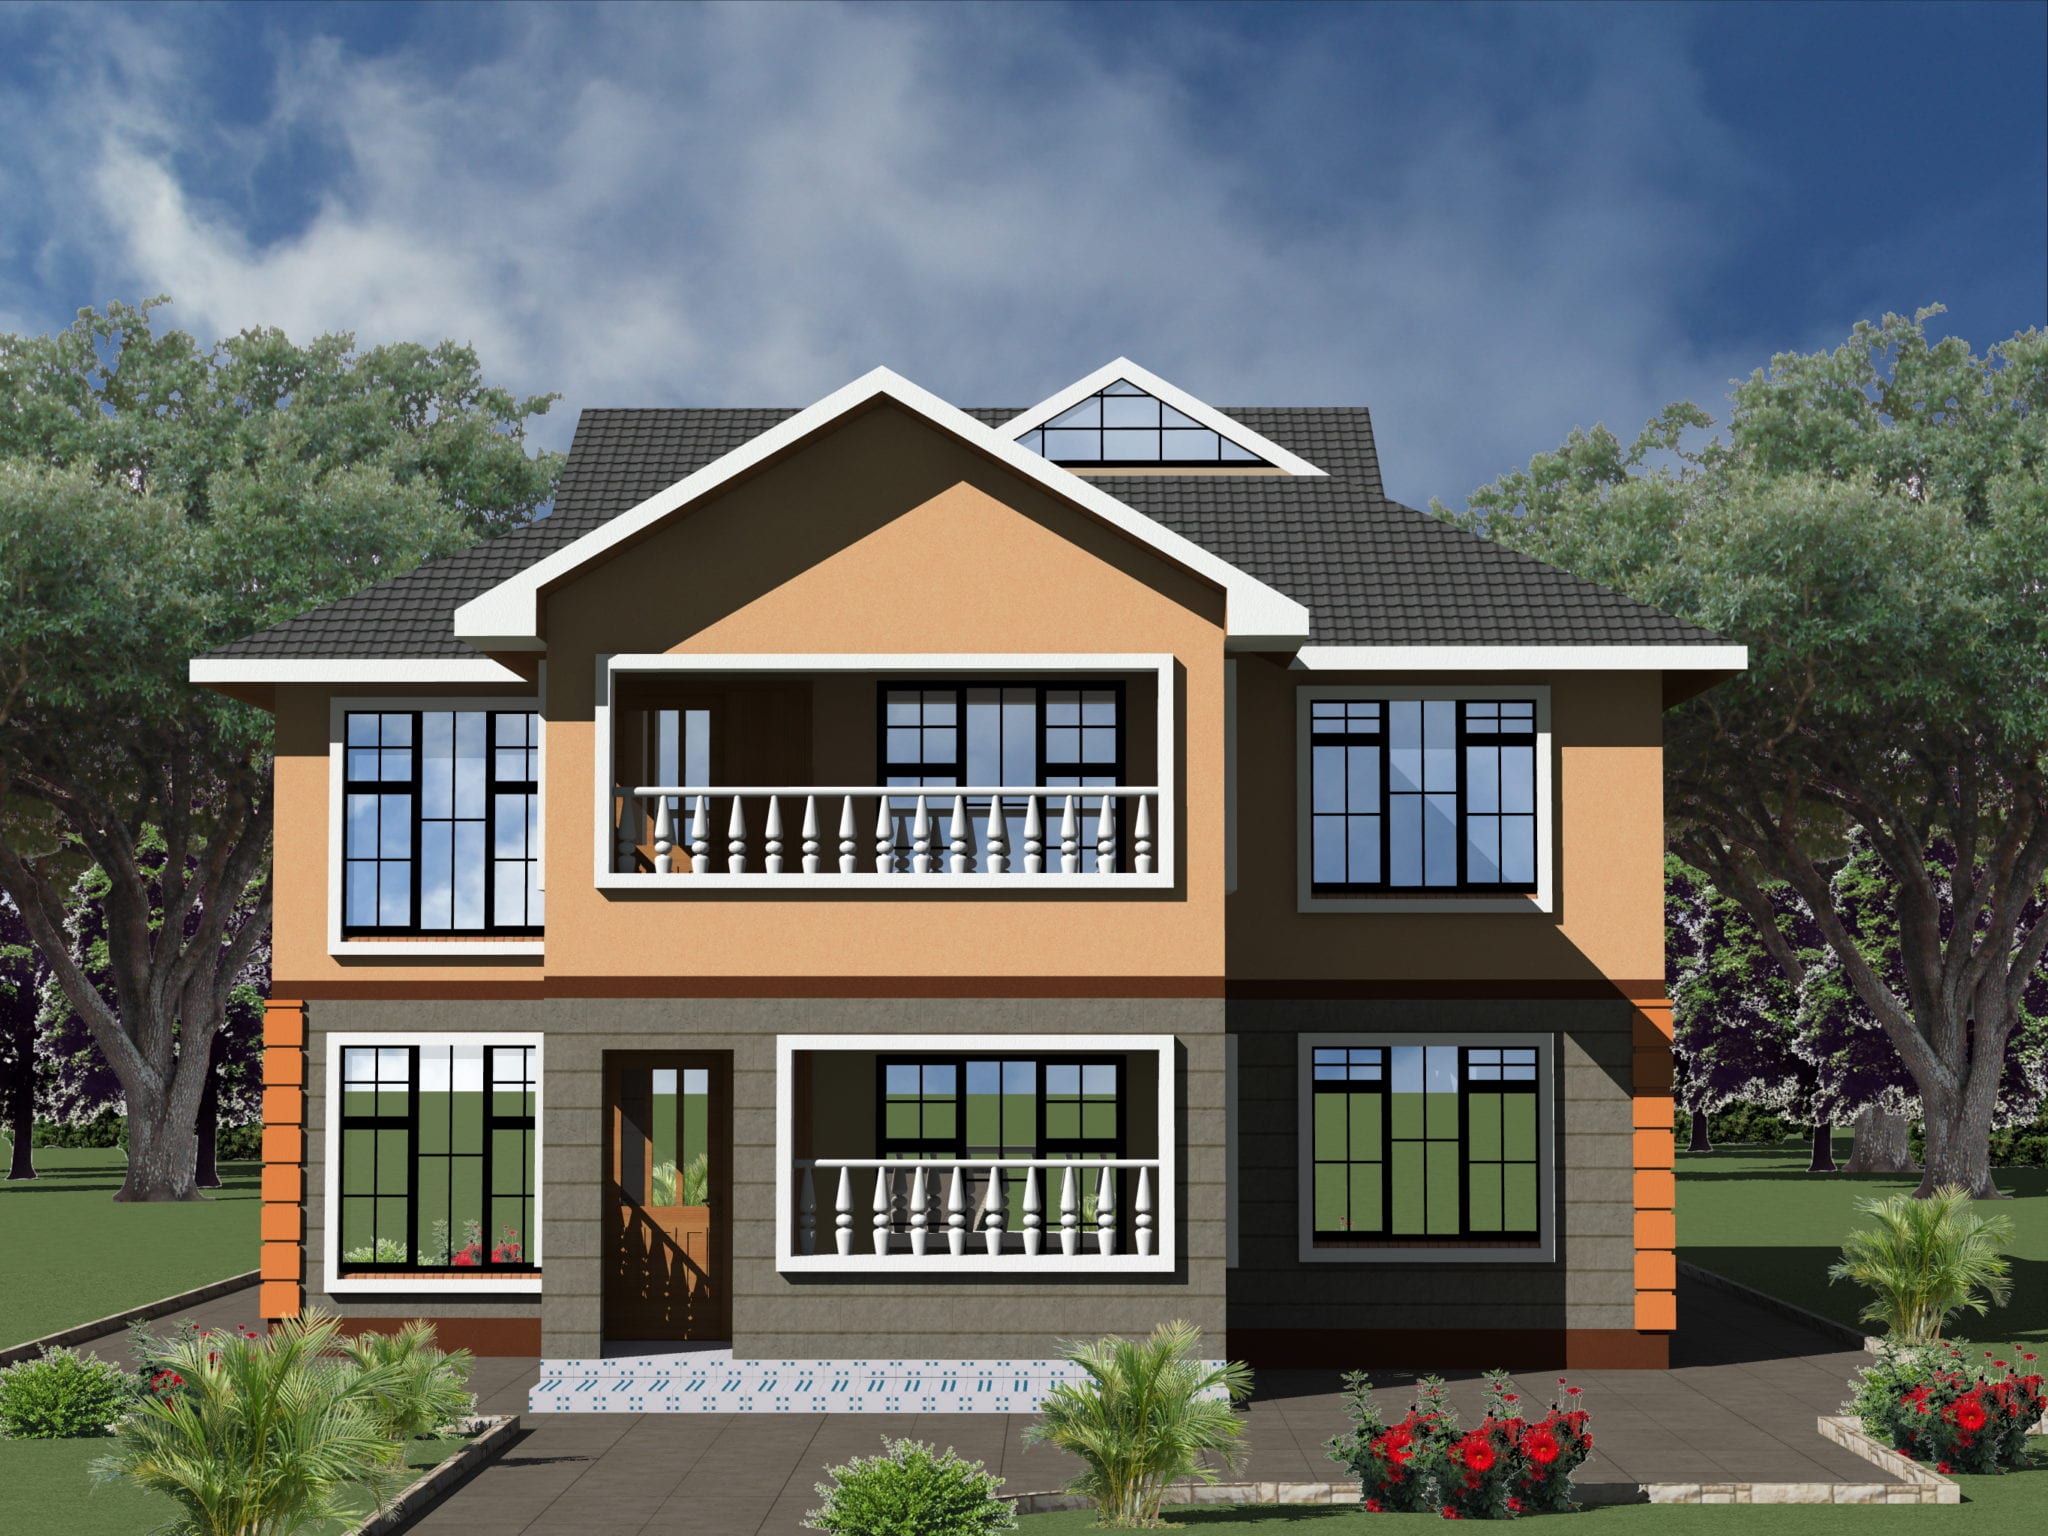 Stylish 5 Bedroom Maisonette House Plans Design Hpd Consult Adroit architecture creative sustainable design solutions for your building projects by architects in kenya. 5 bedroom maisonette house plans design